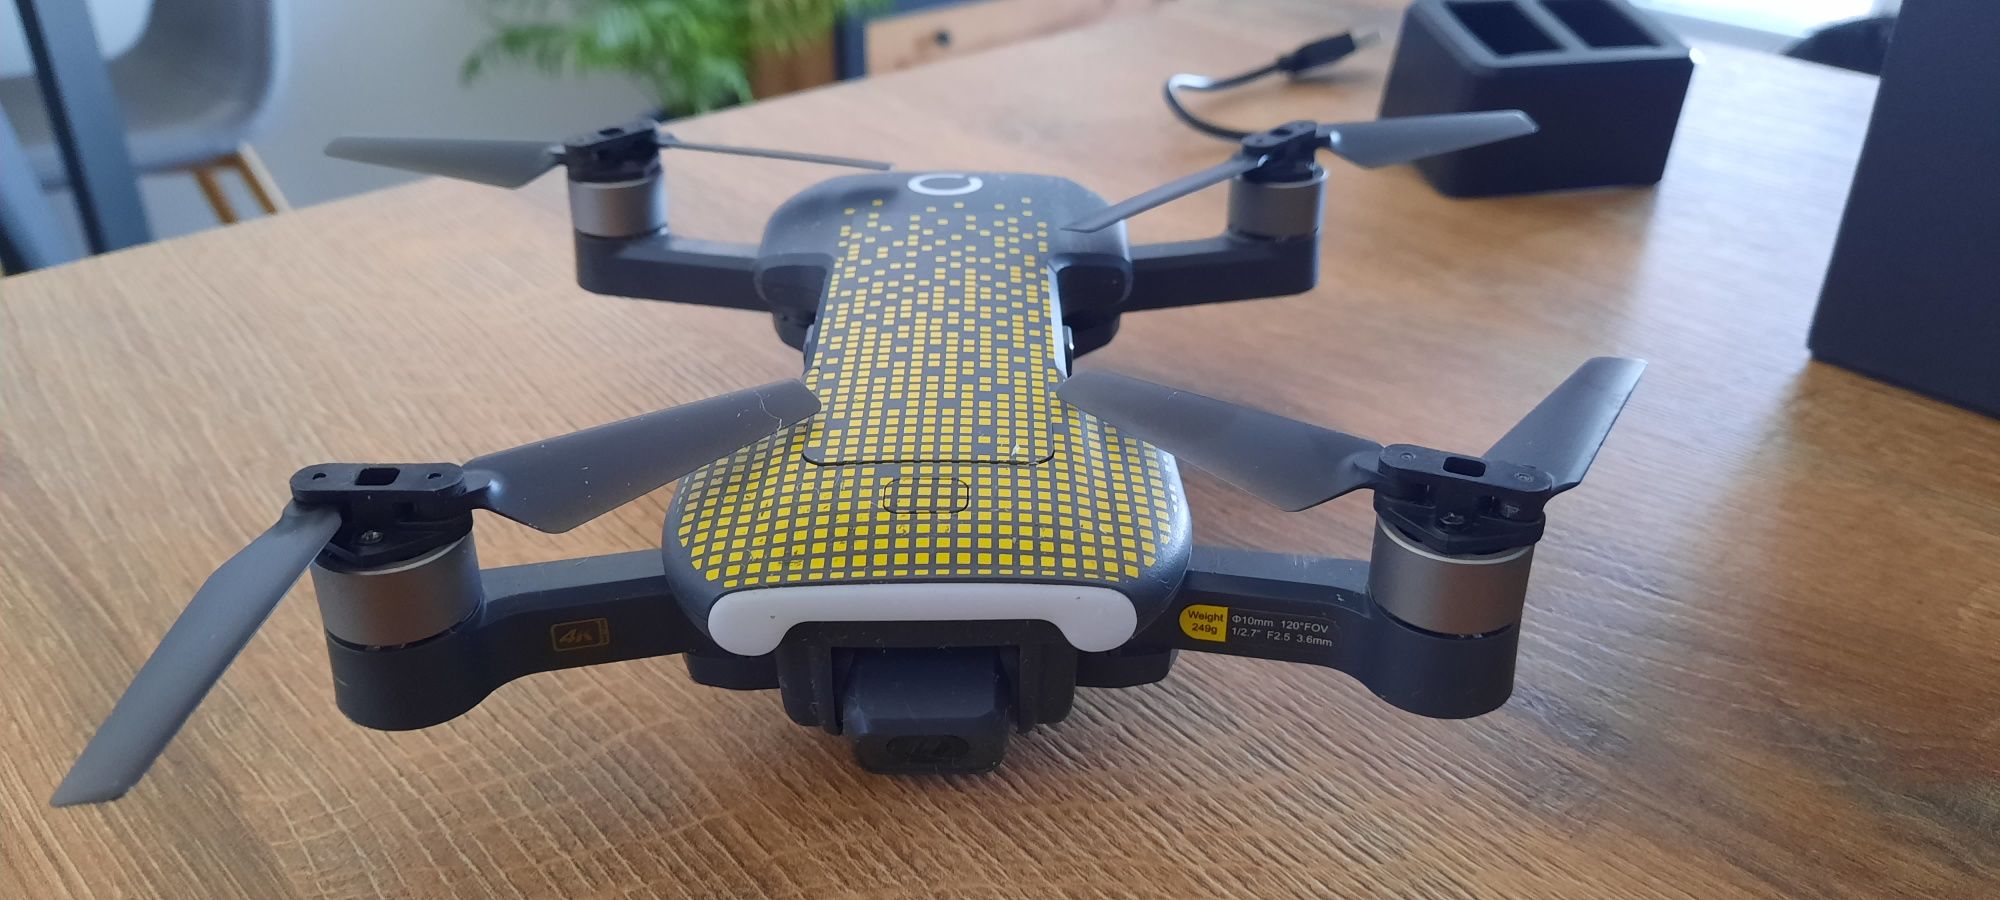 Dron Overmax X-bee fold one